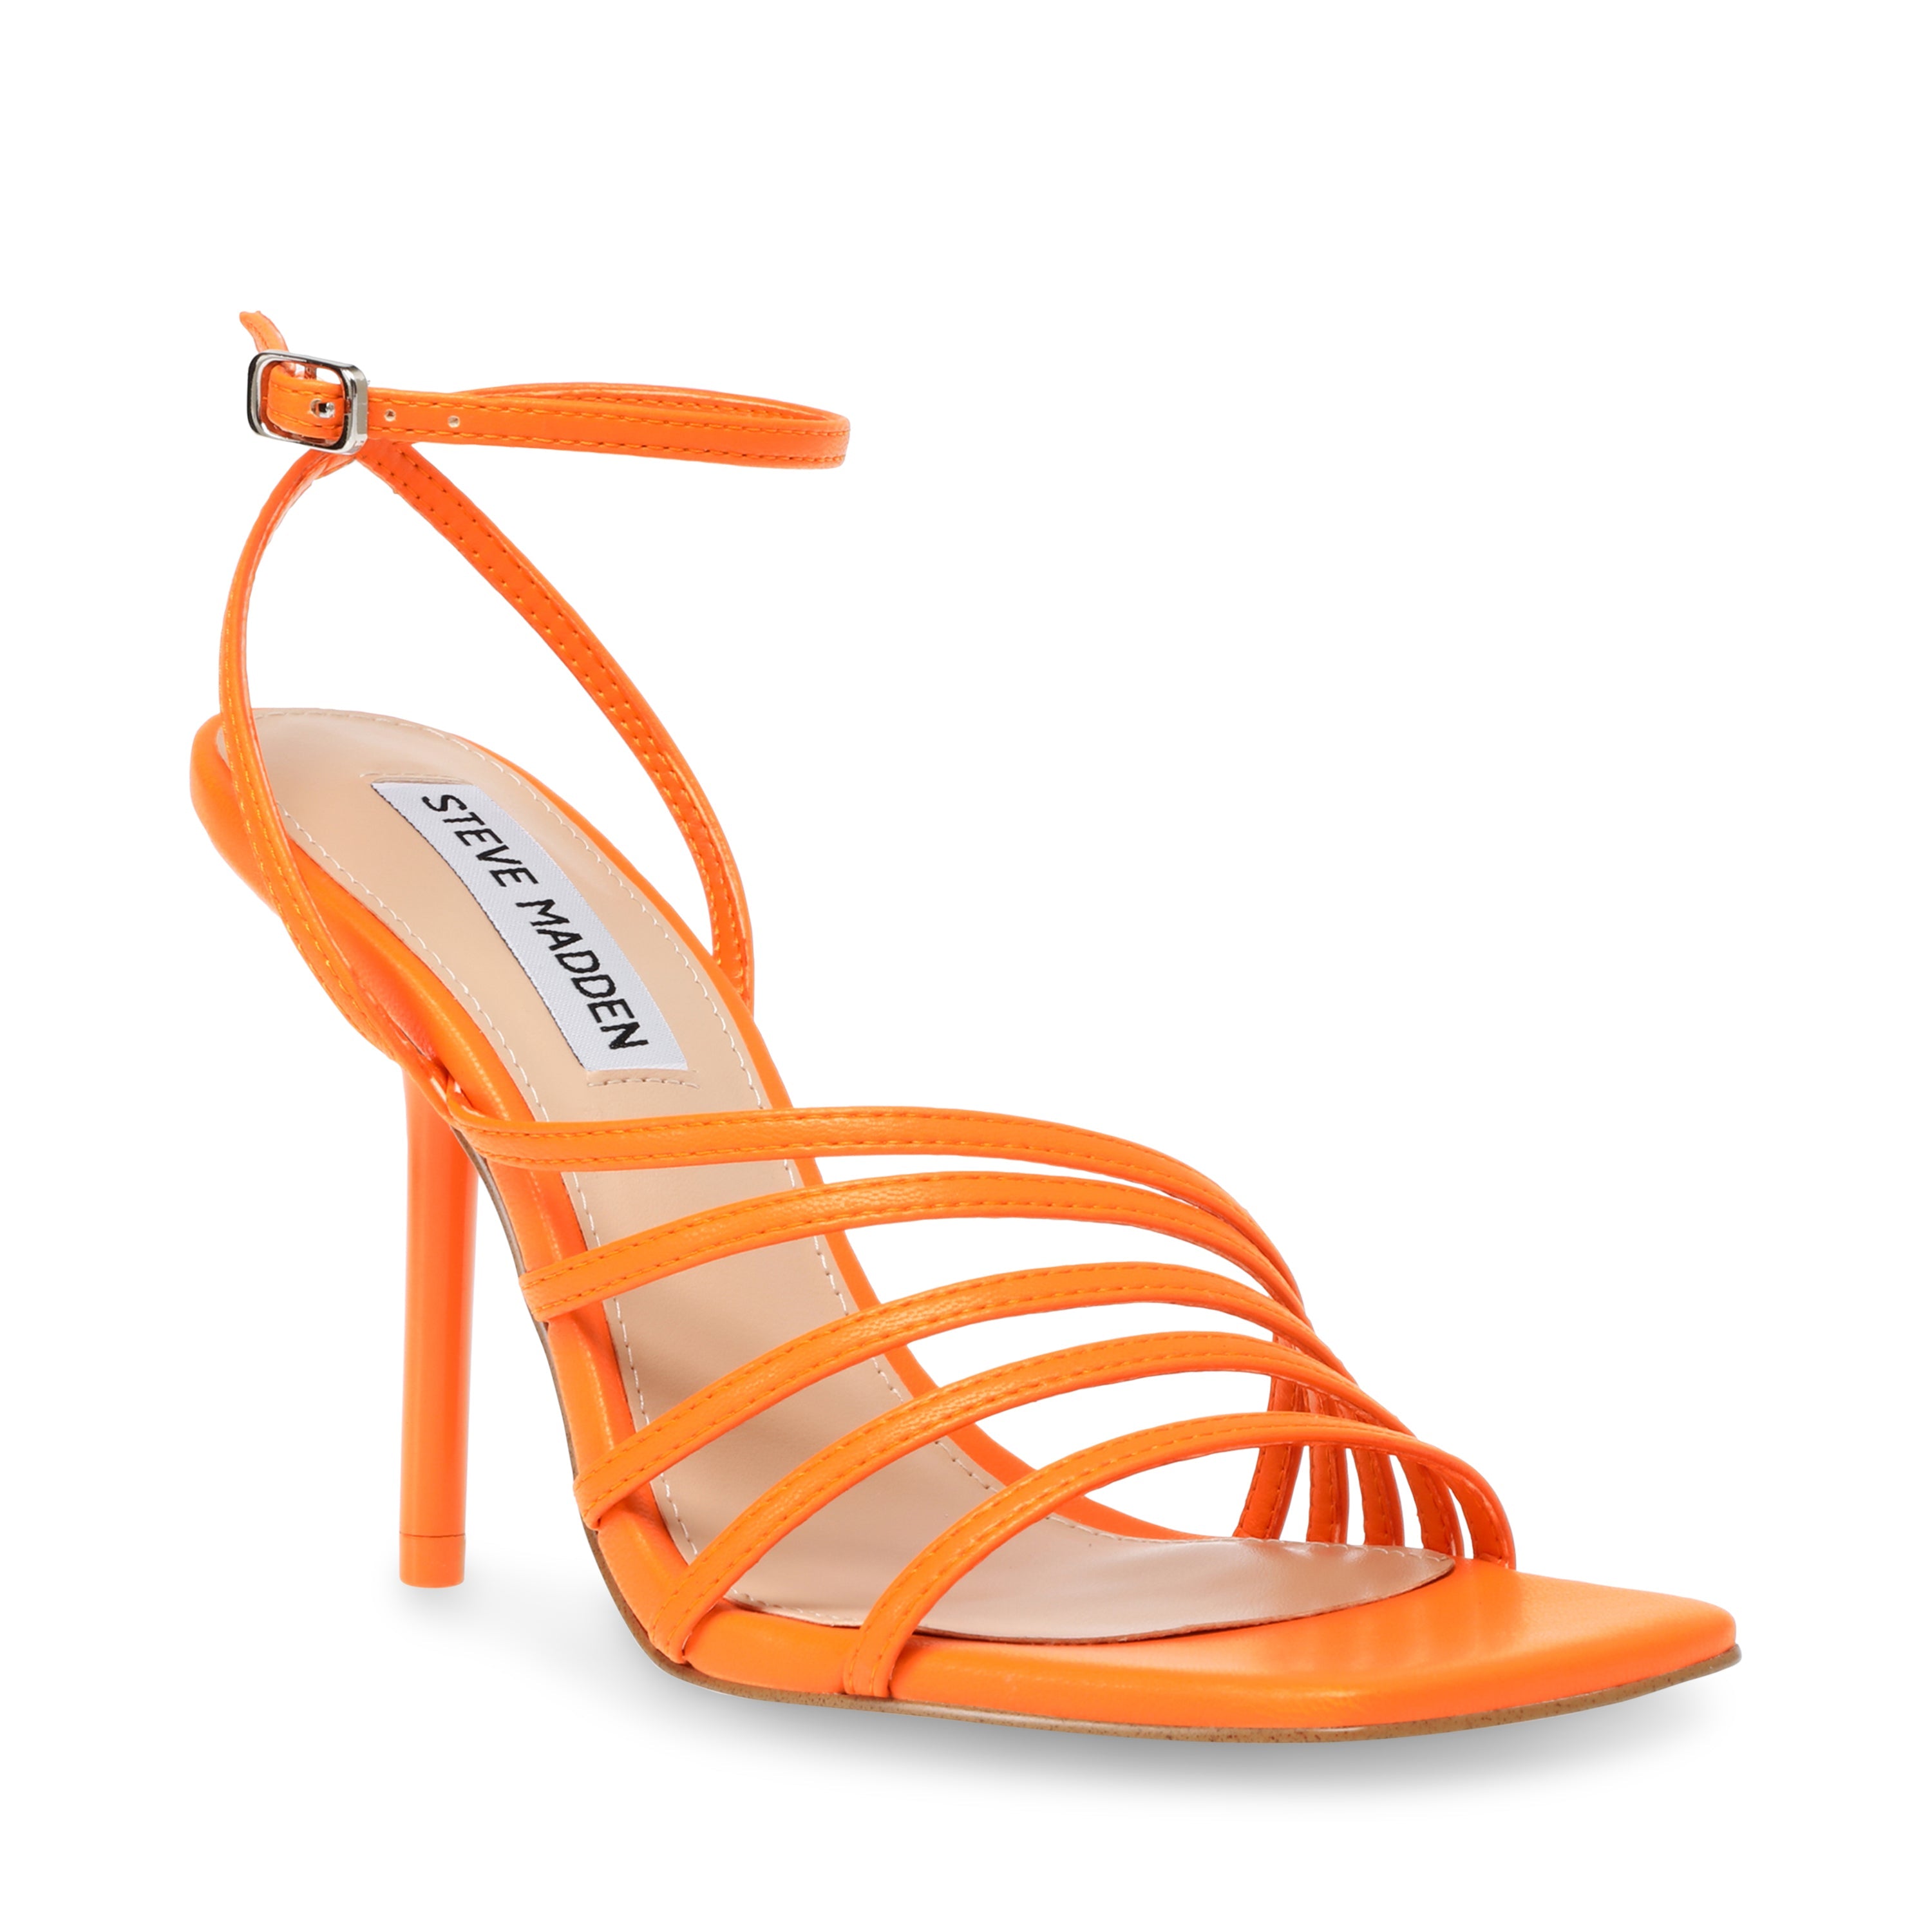 All in Sandal NEON APRICOT- Hover Image